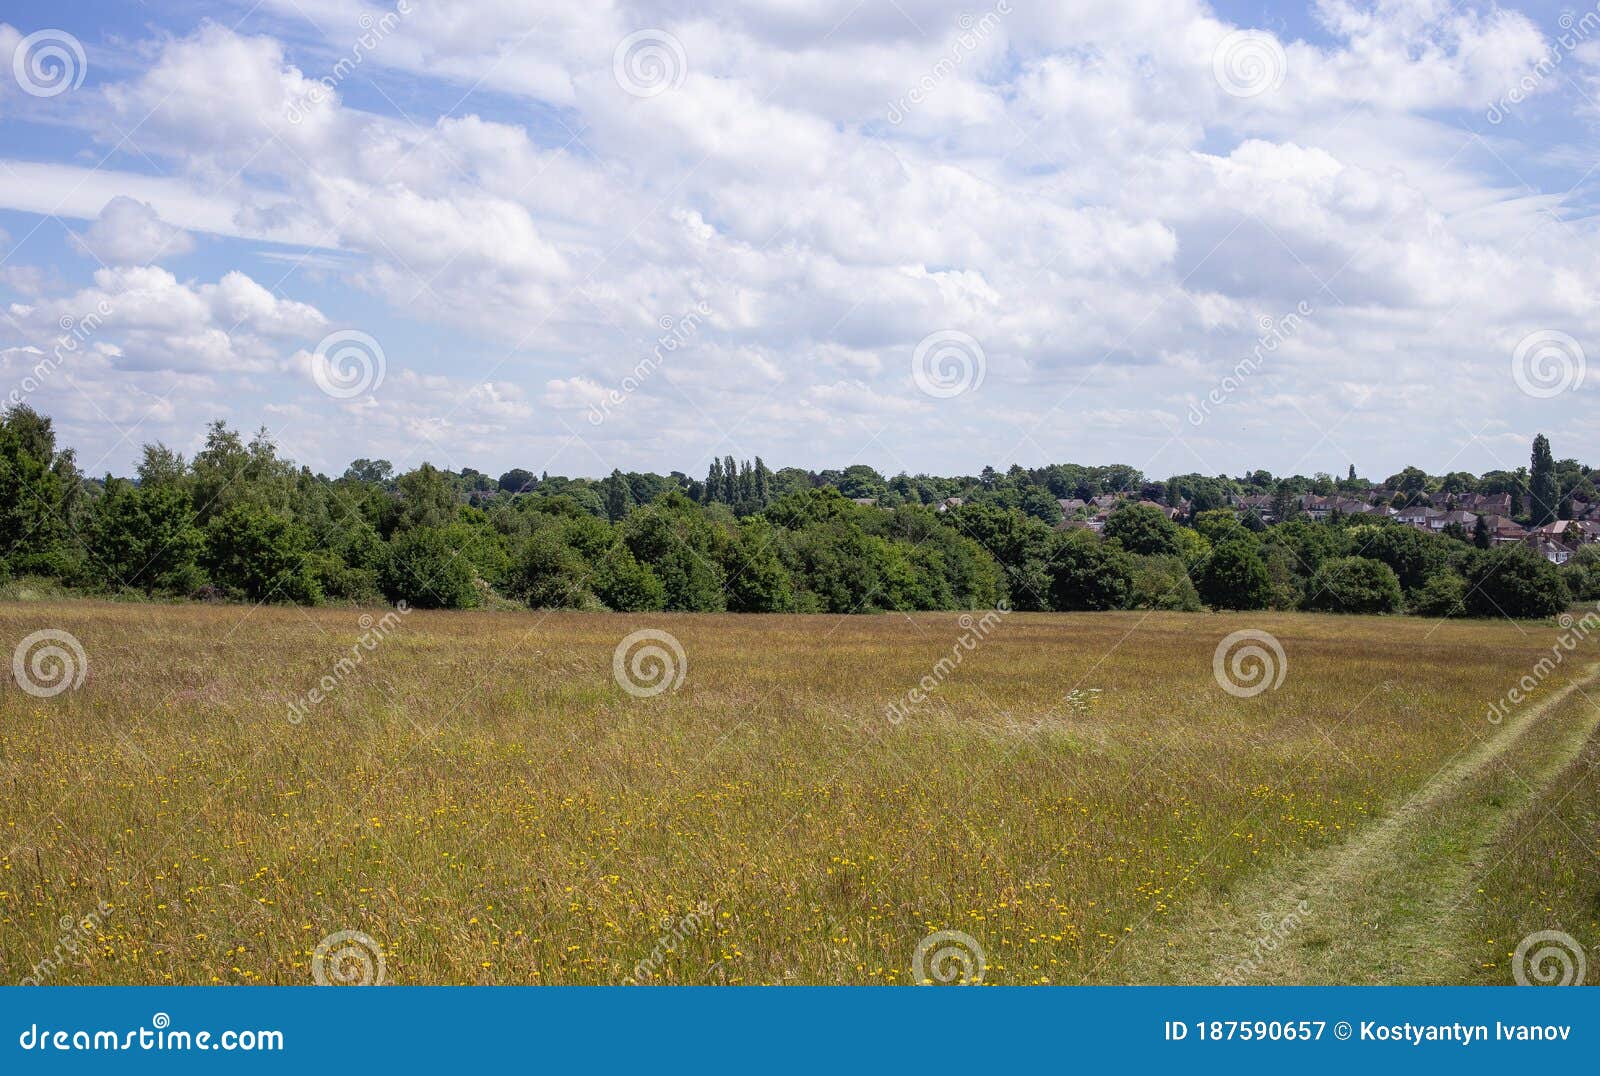 sandwell valley country park field